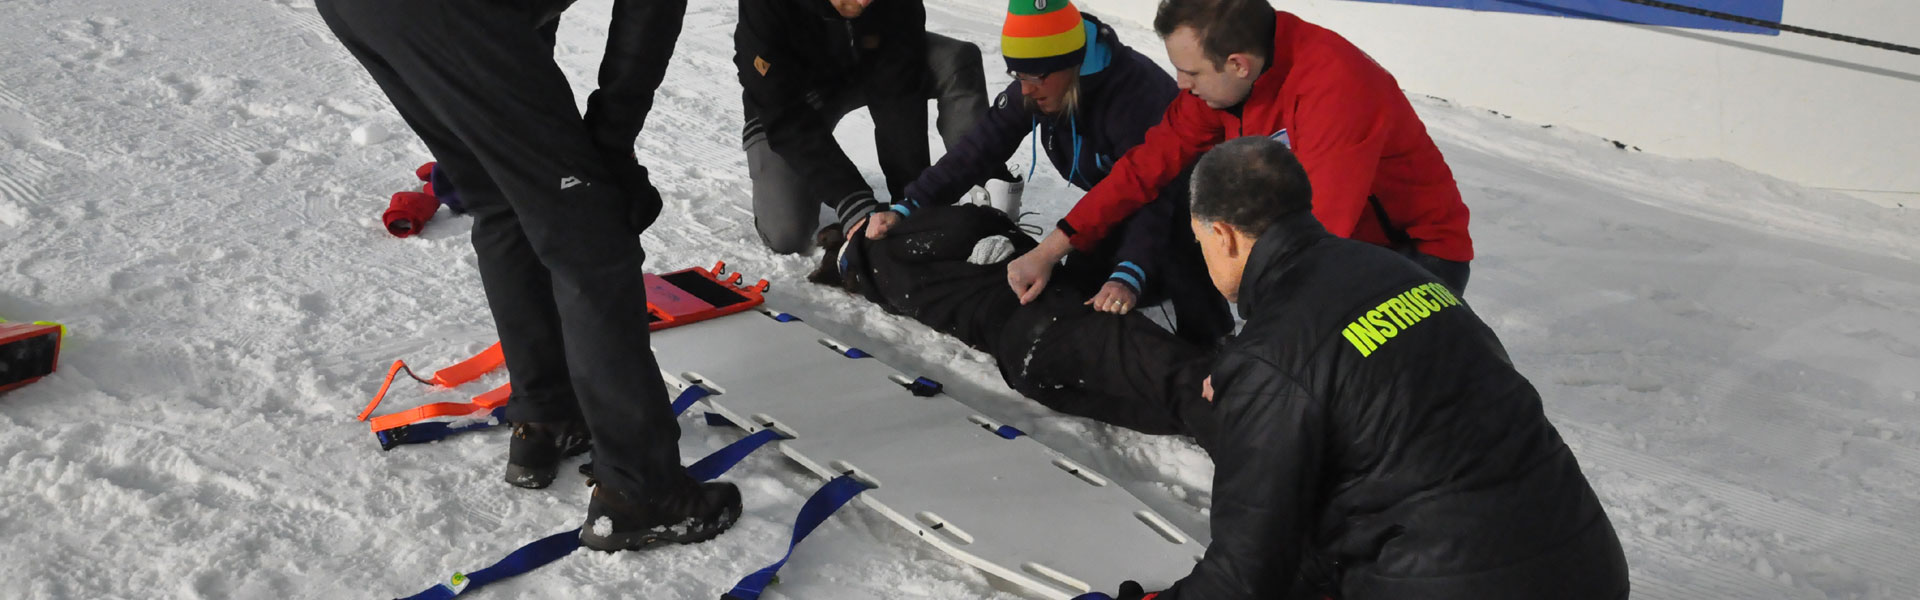 Image of casualty being put on board in snow environment